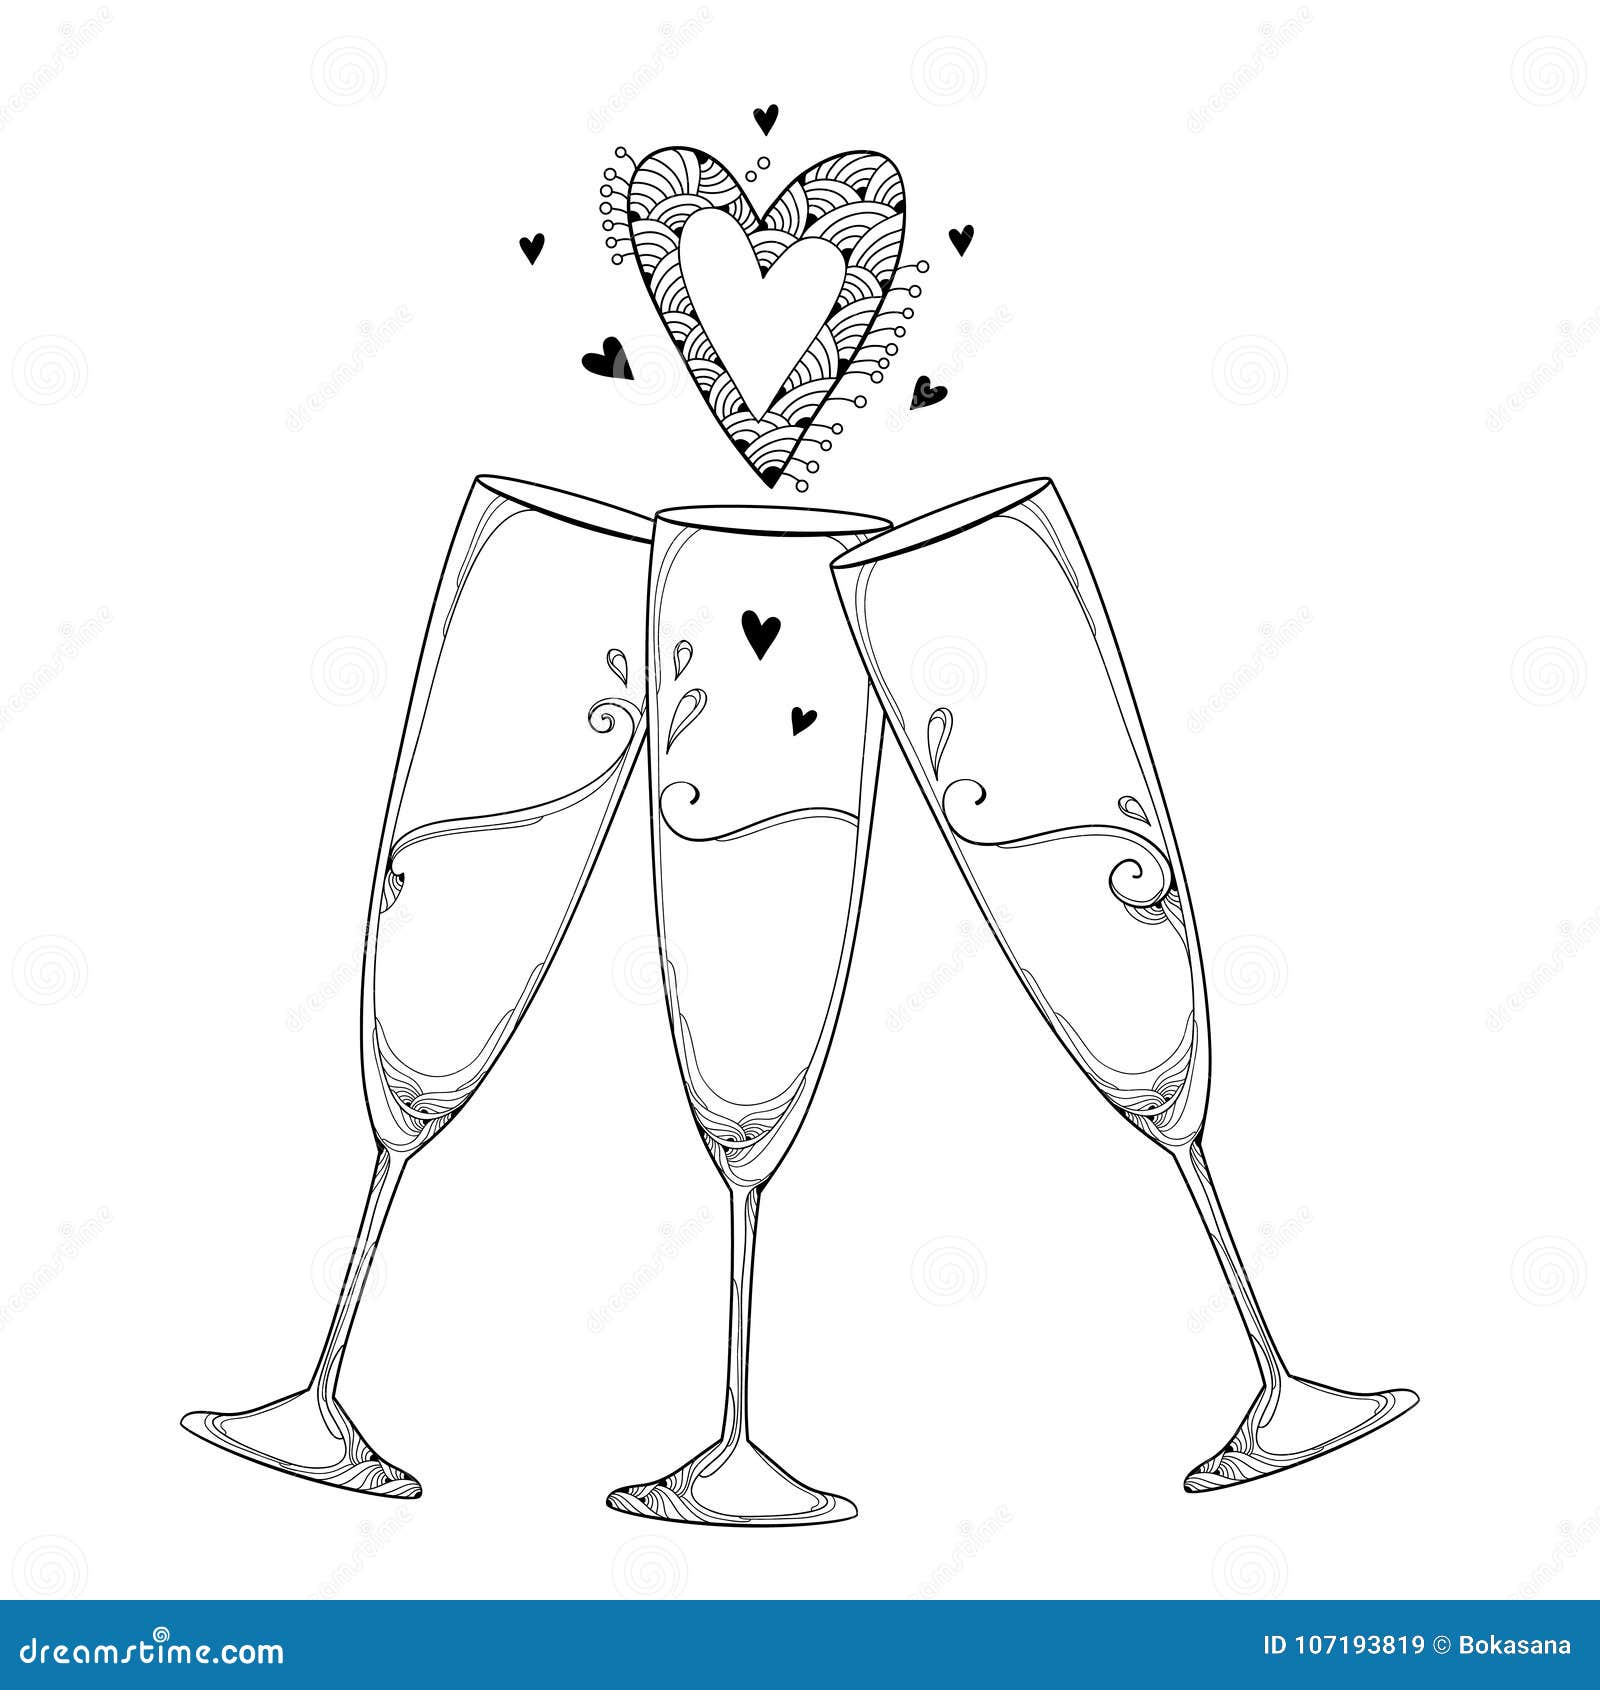 Download Vector Illustration With Three Contour Toasting Champagne Glass And Ornate Heart In Black ...